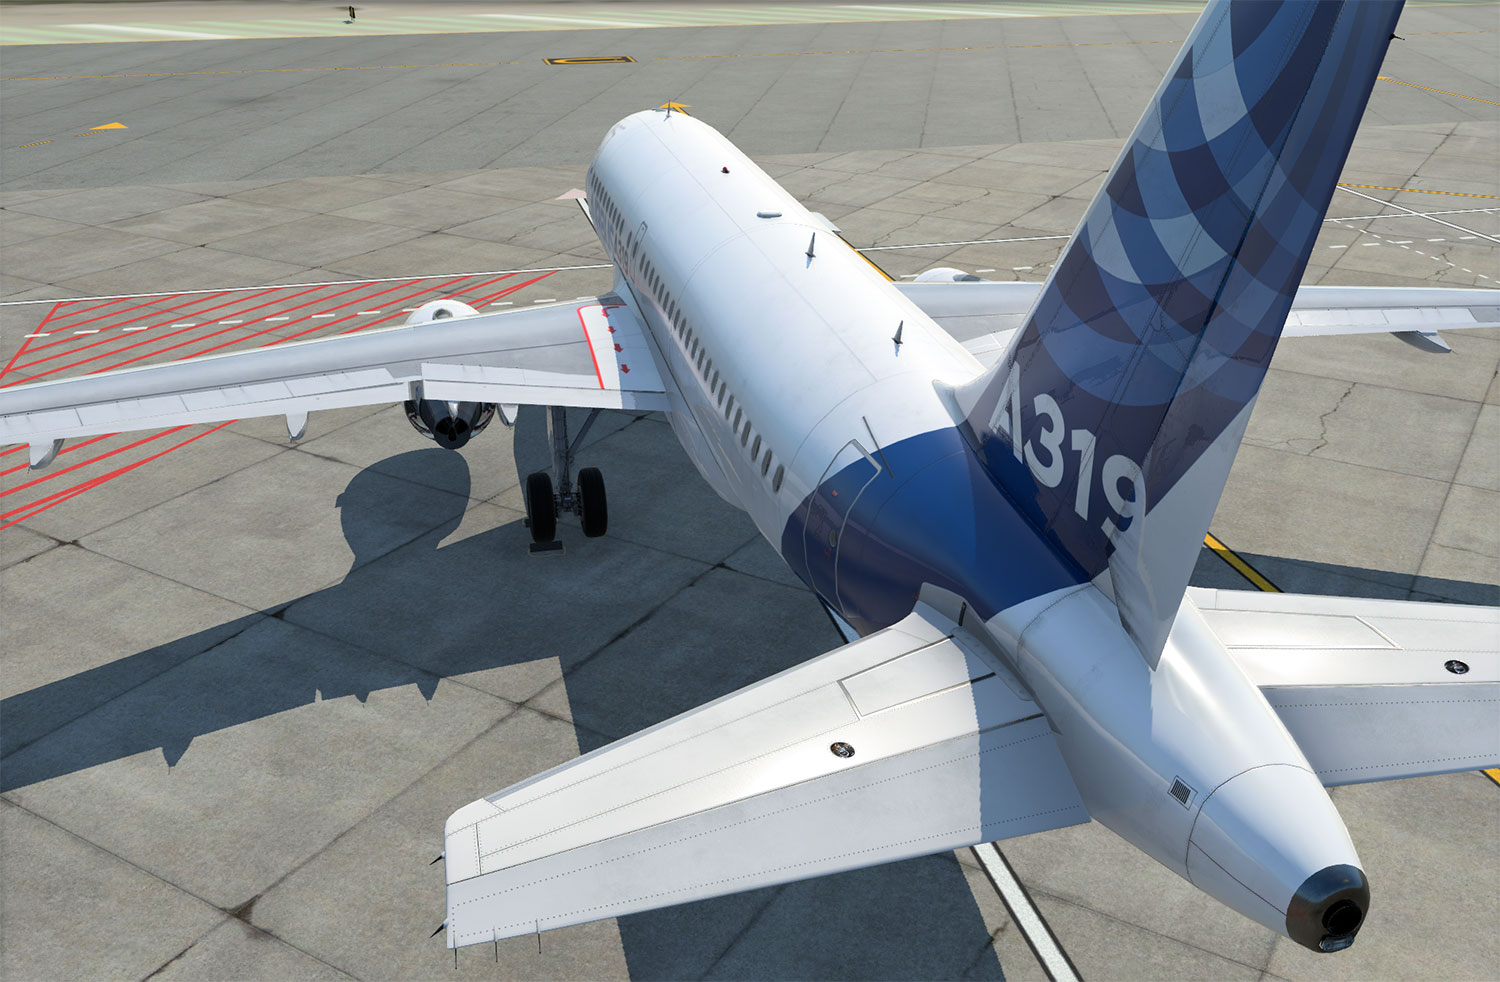 ToLiss - A319 for X-Plane 12/11